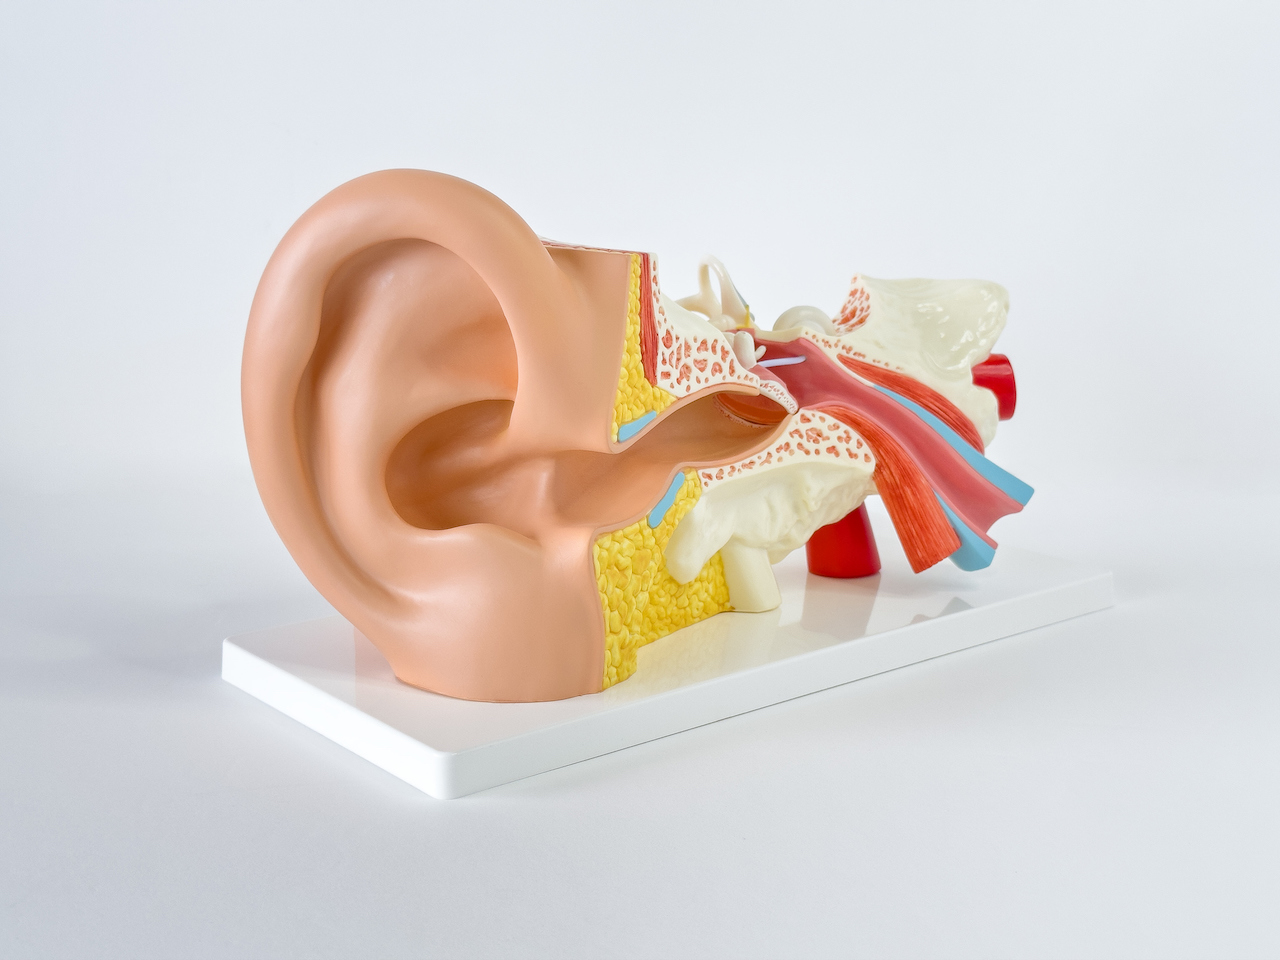 A plastic model of the human ear and ear canal.